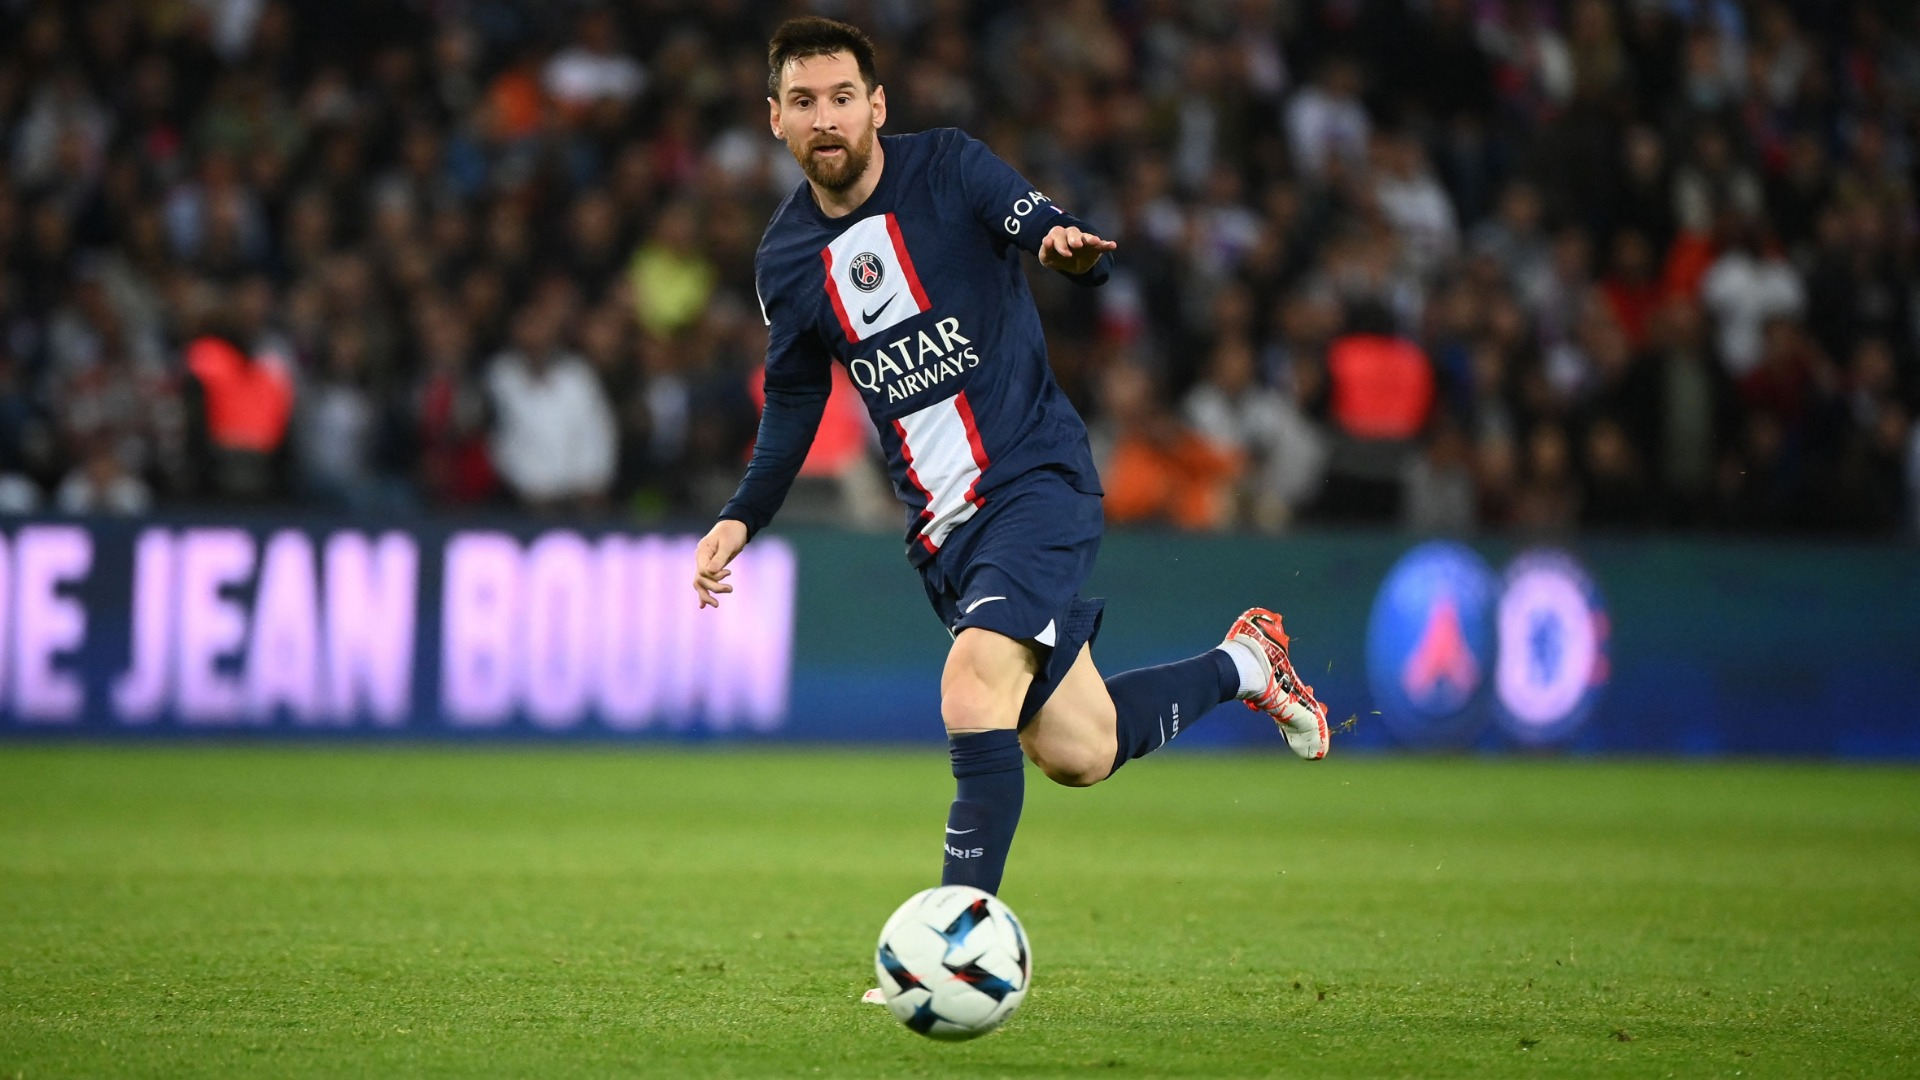 Lionel Messi Not in Top 50 for Ballon d'Or Shocks Former Manager